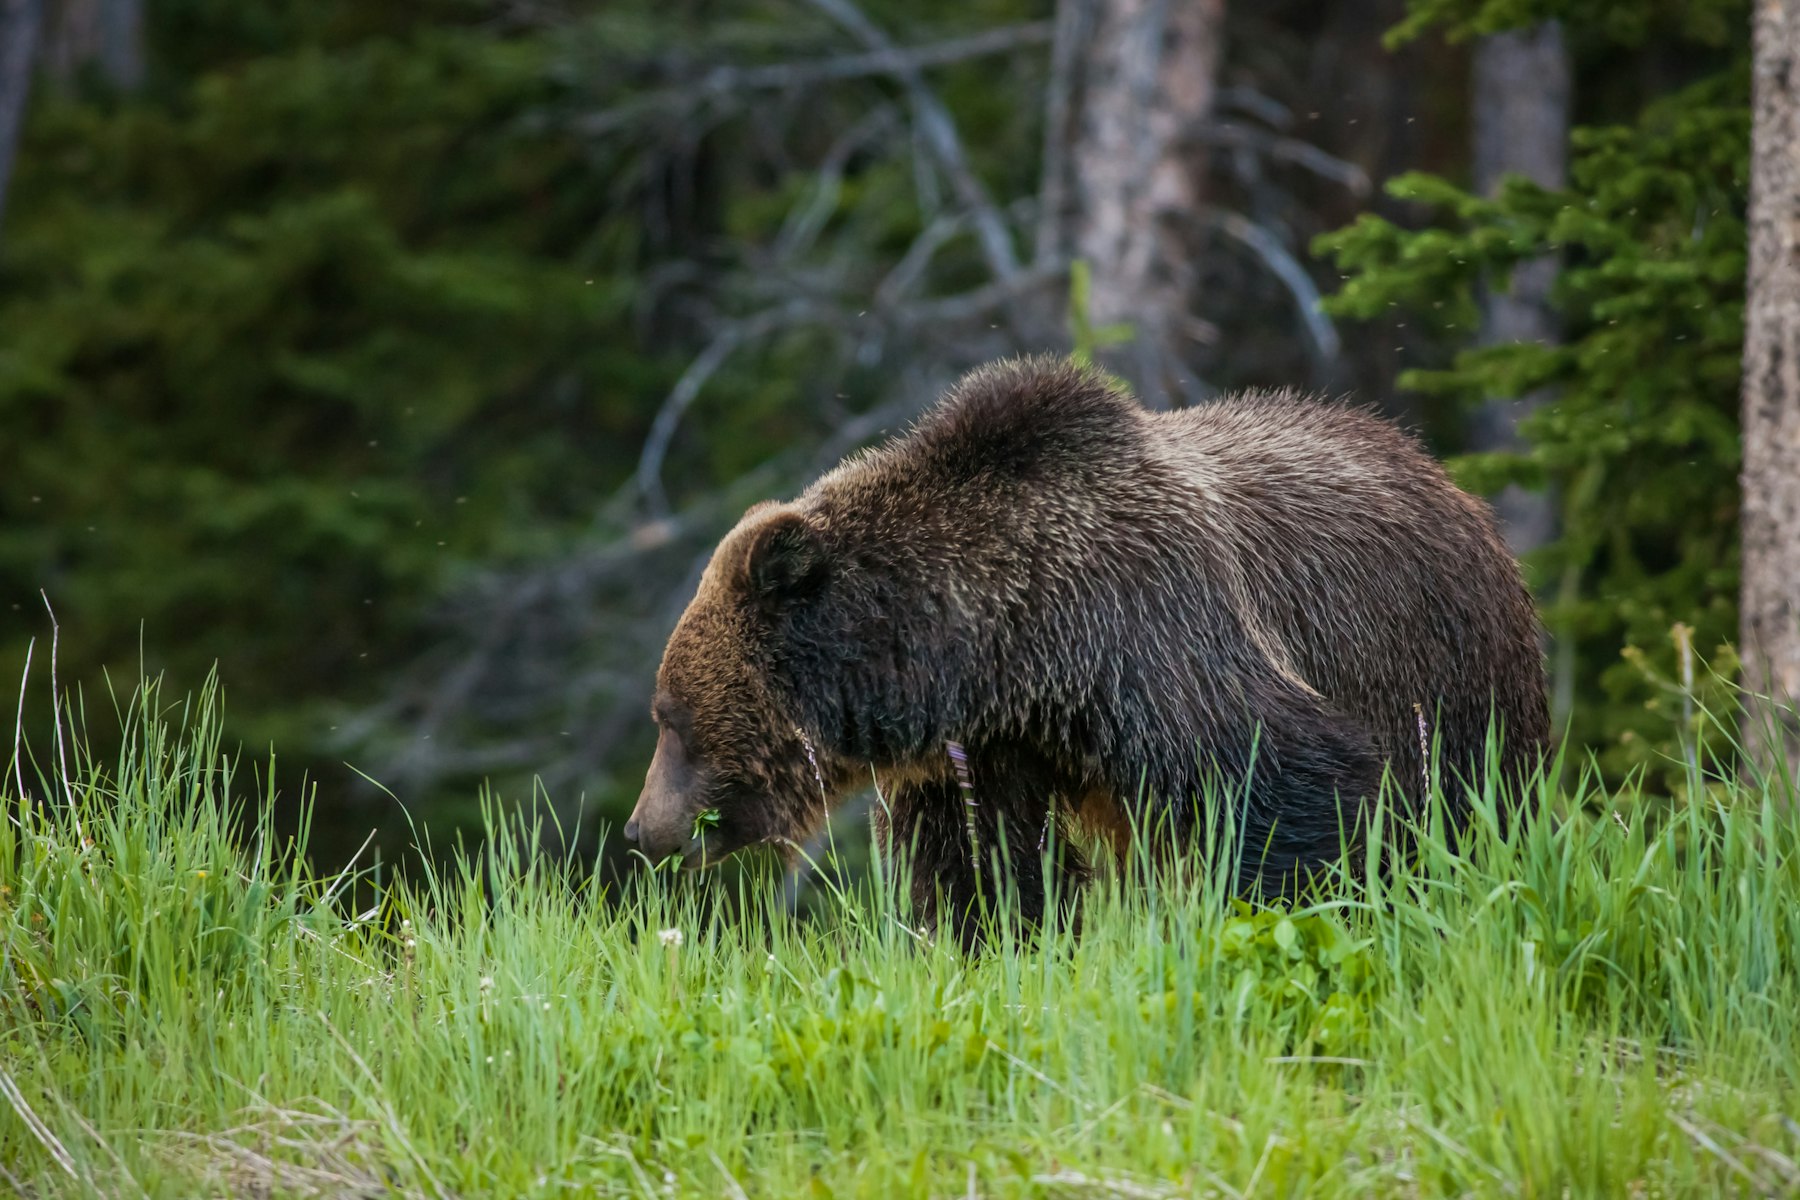 How to Prevent Bear Attacks, According to Experts